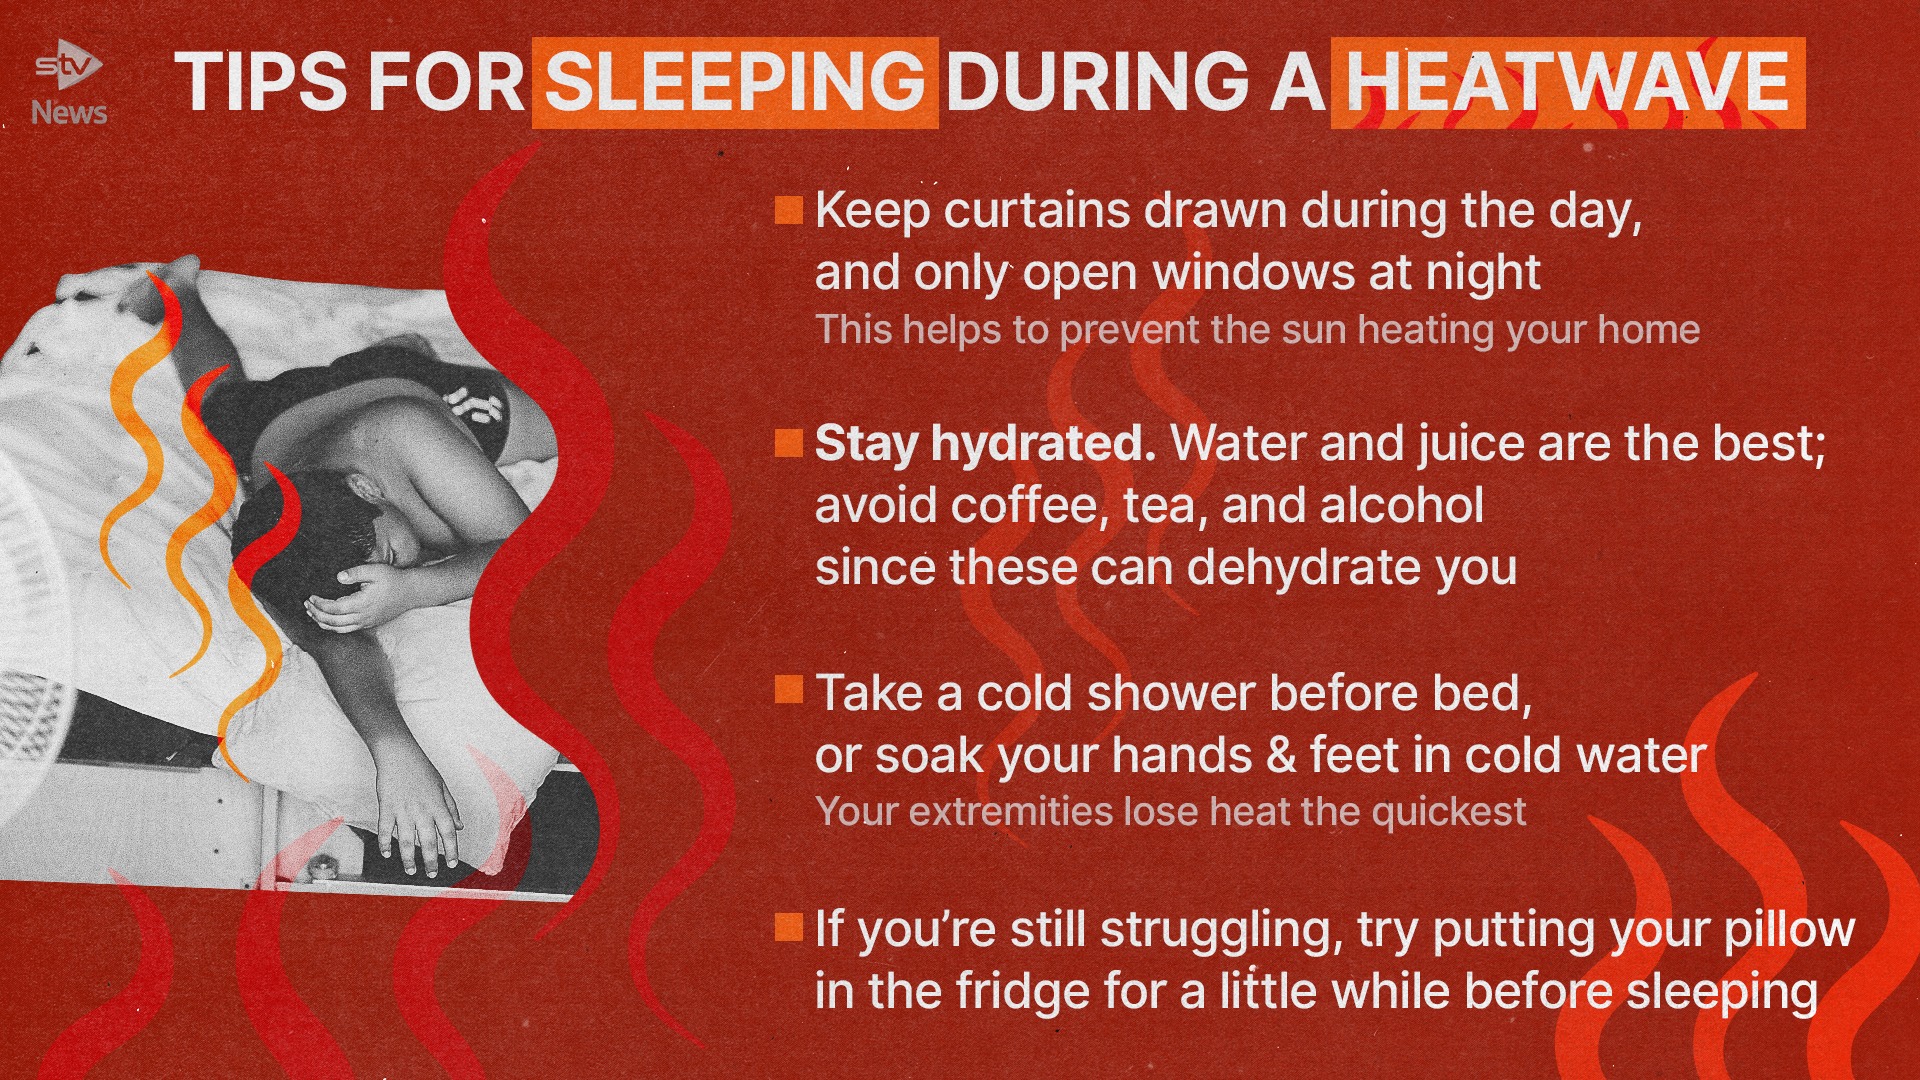 Tips for sleeping in hot weather